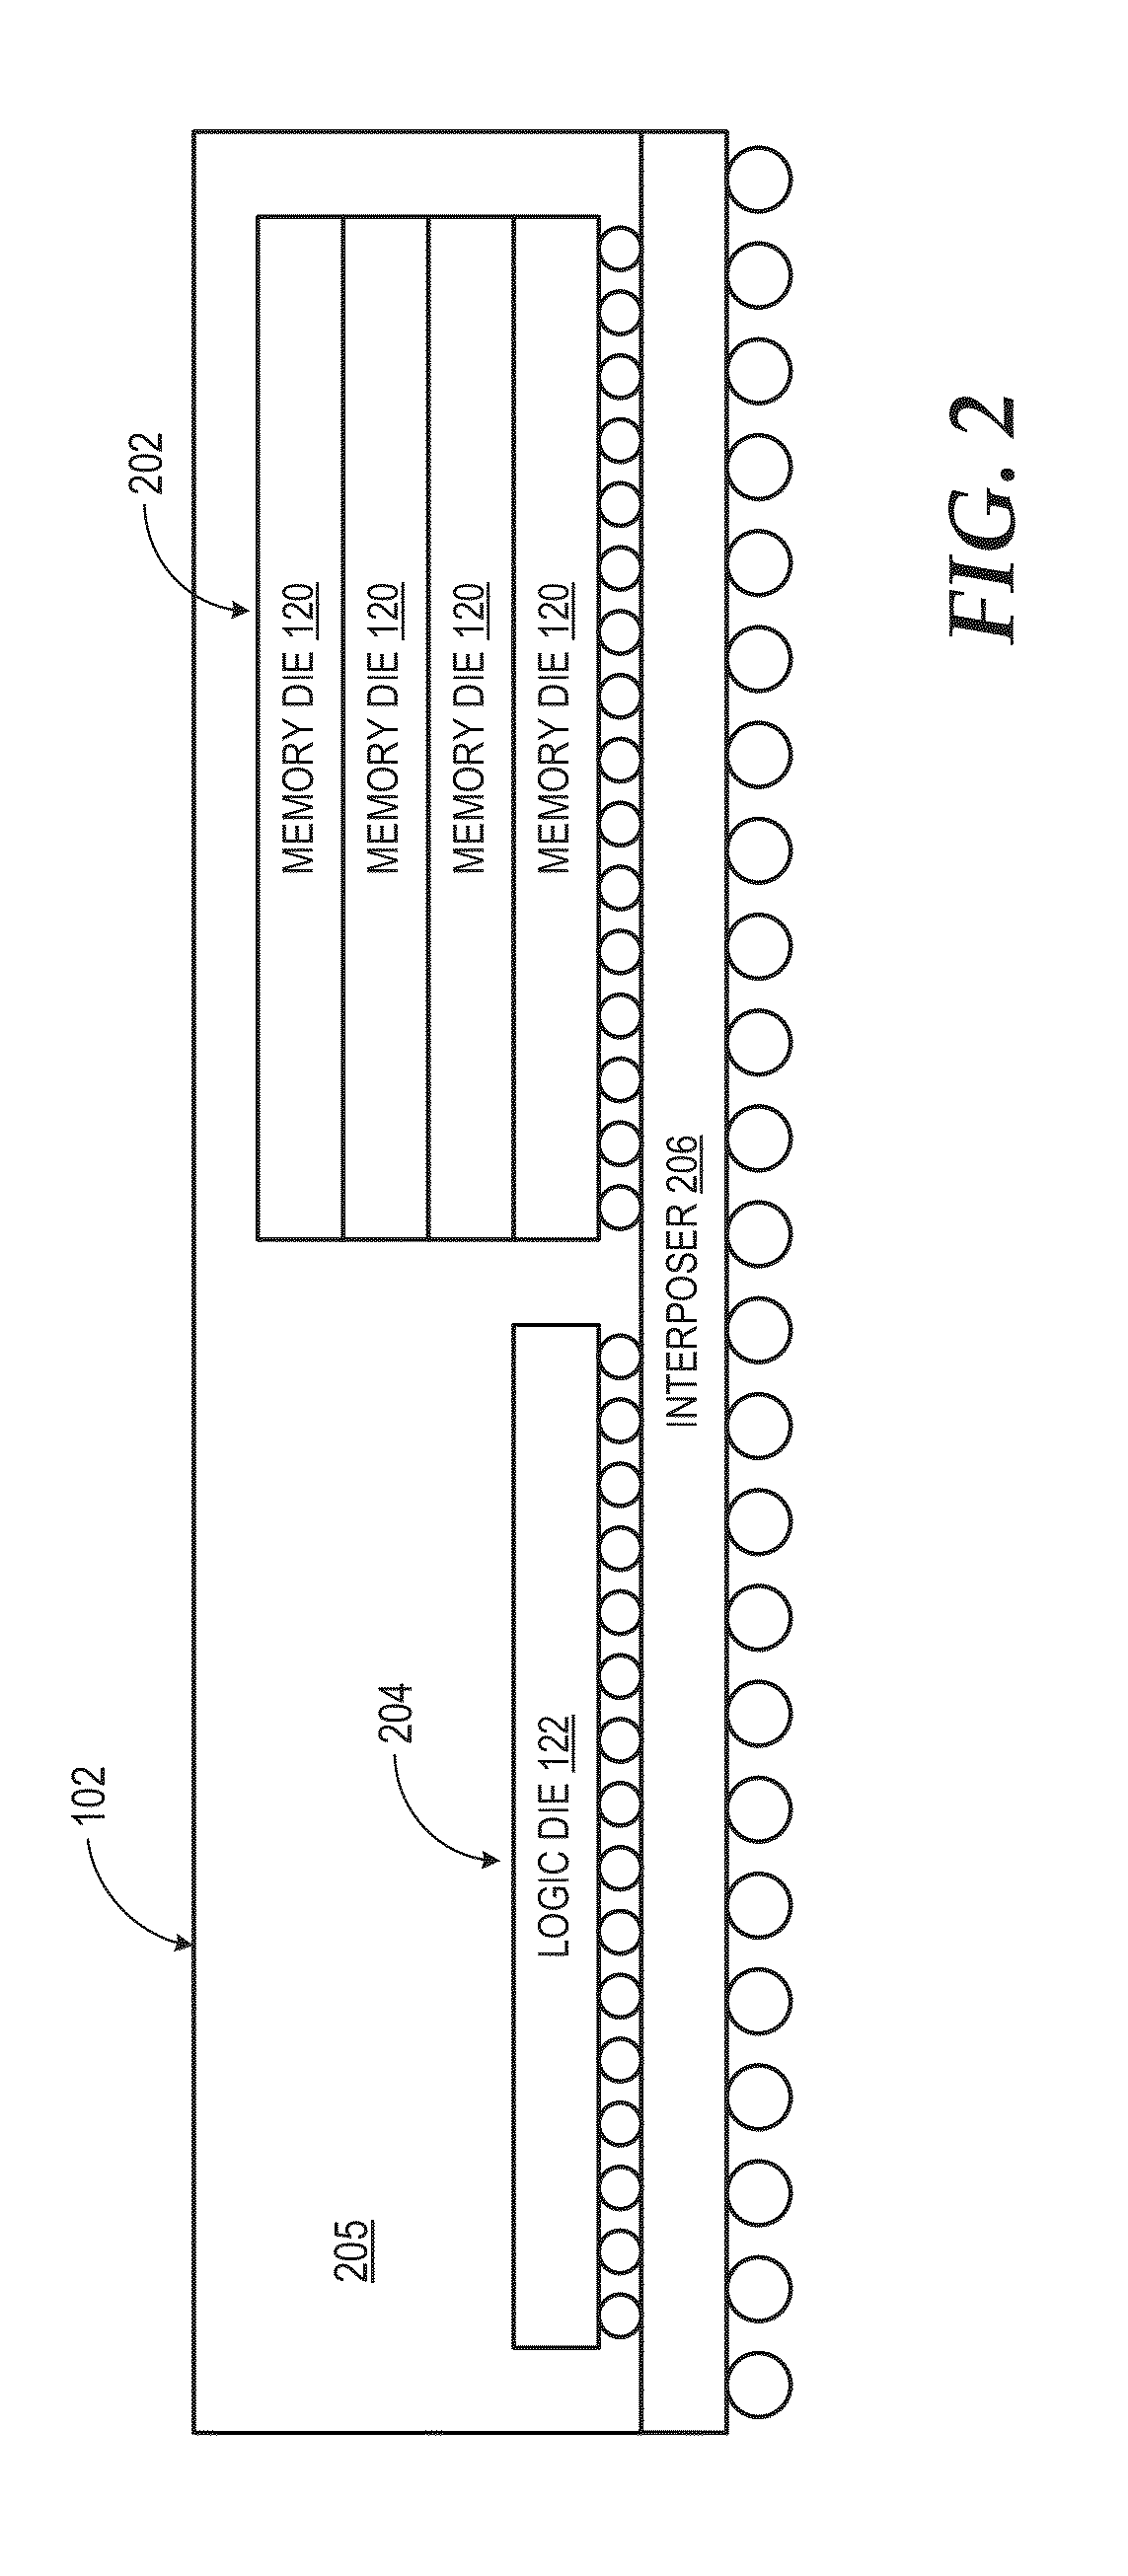 Die-stacked memory device with reconfigurable logic